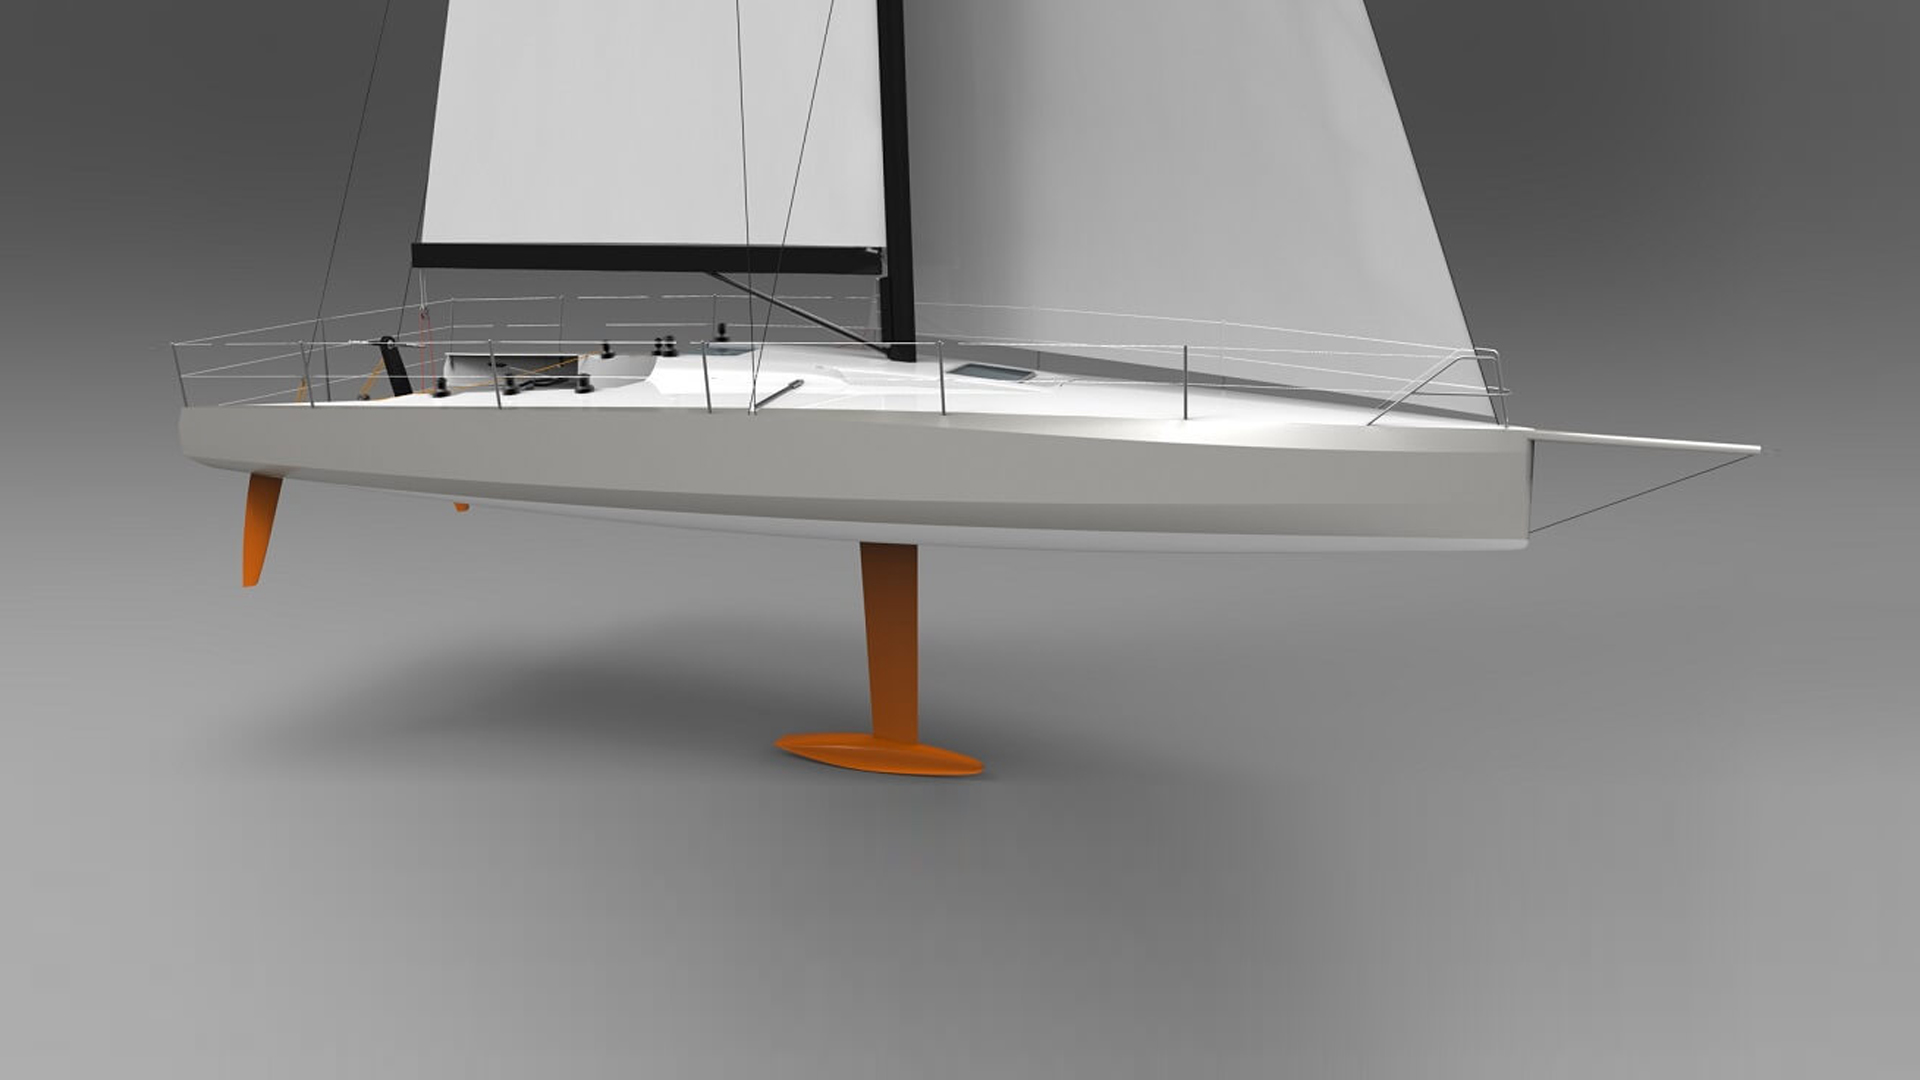 This is Owen Clarke Design's first medium size IRC ORC rating rule inshore 40 foot racing yacht design the OCD 401